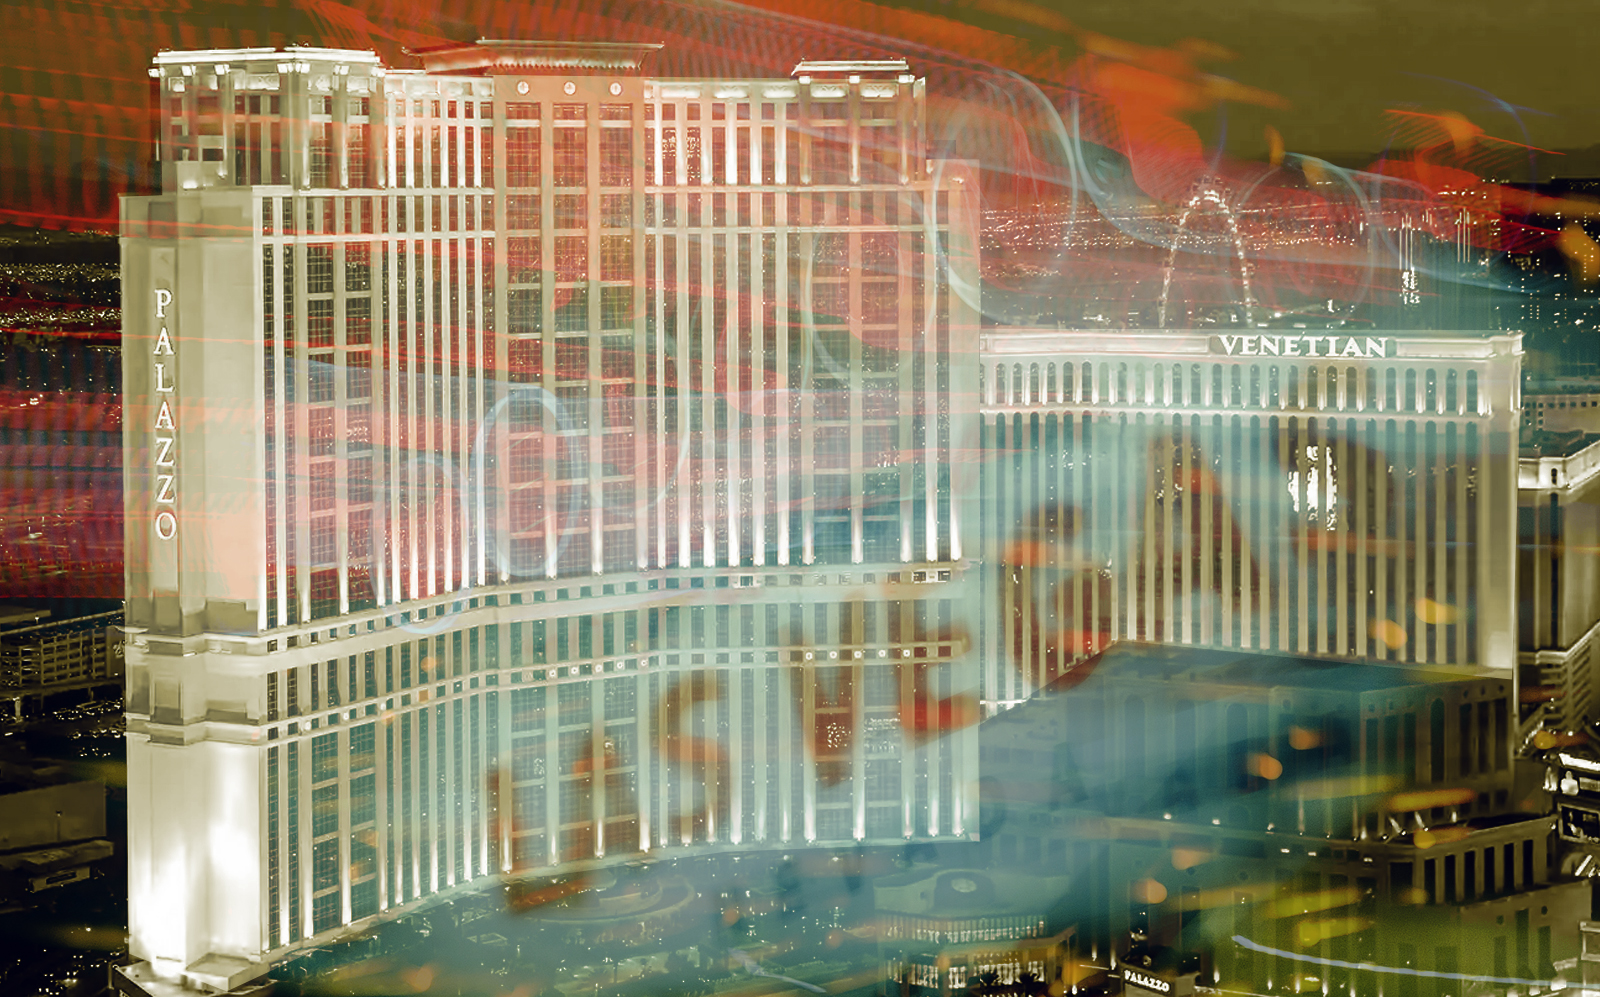 The Venetian, Palazzo, Sands Expo sold for $6.25 billion on the